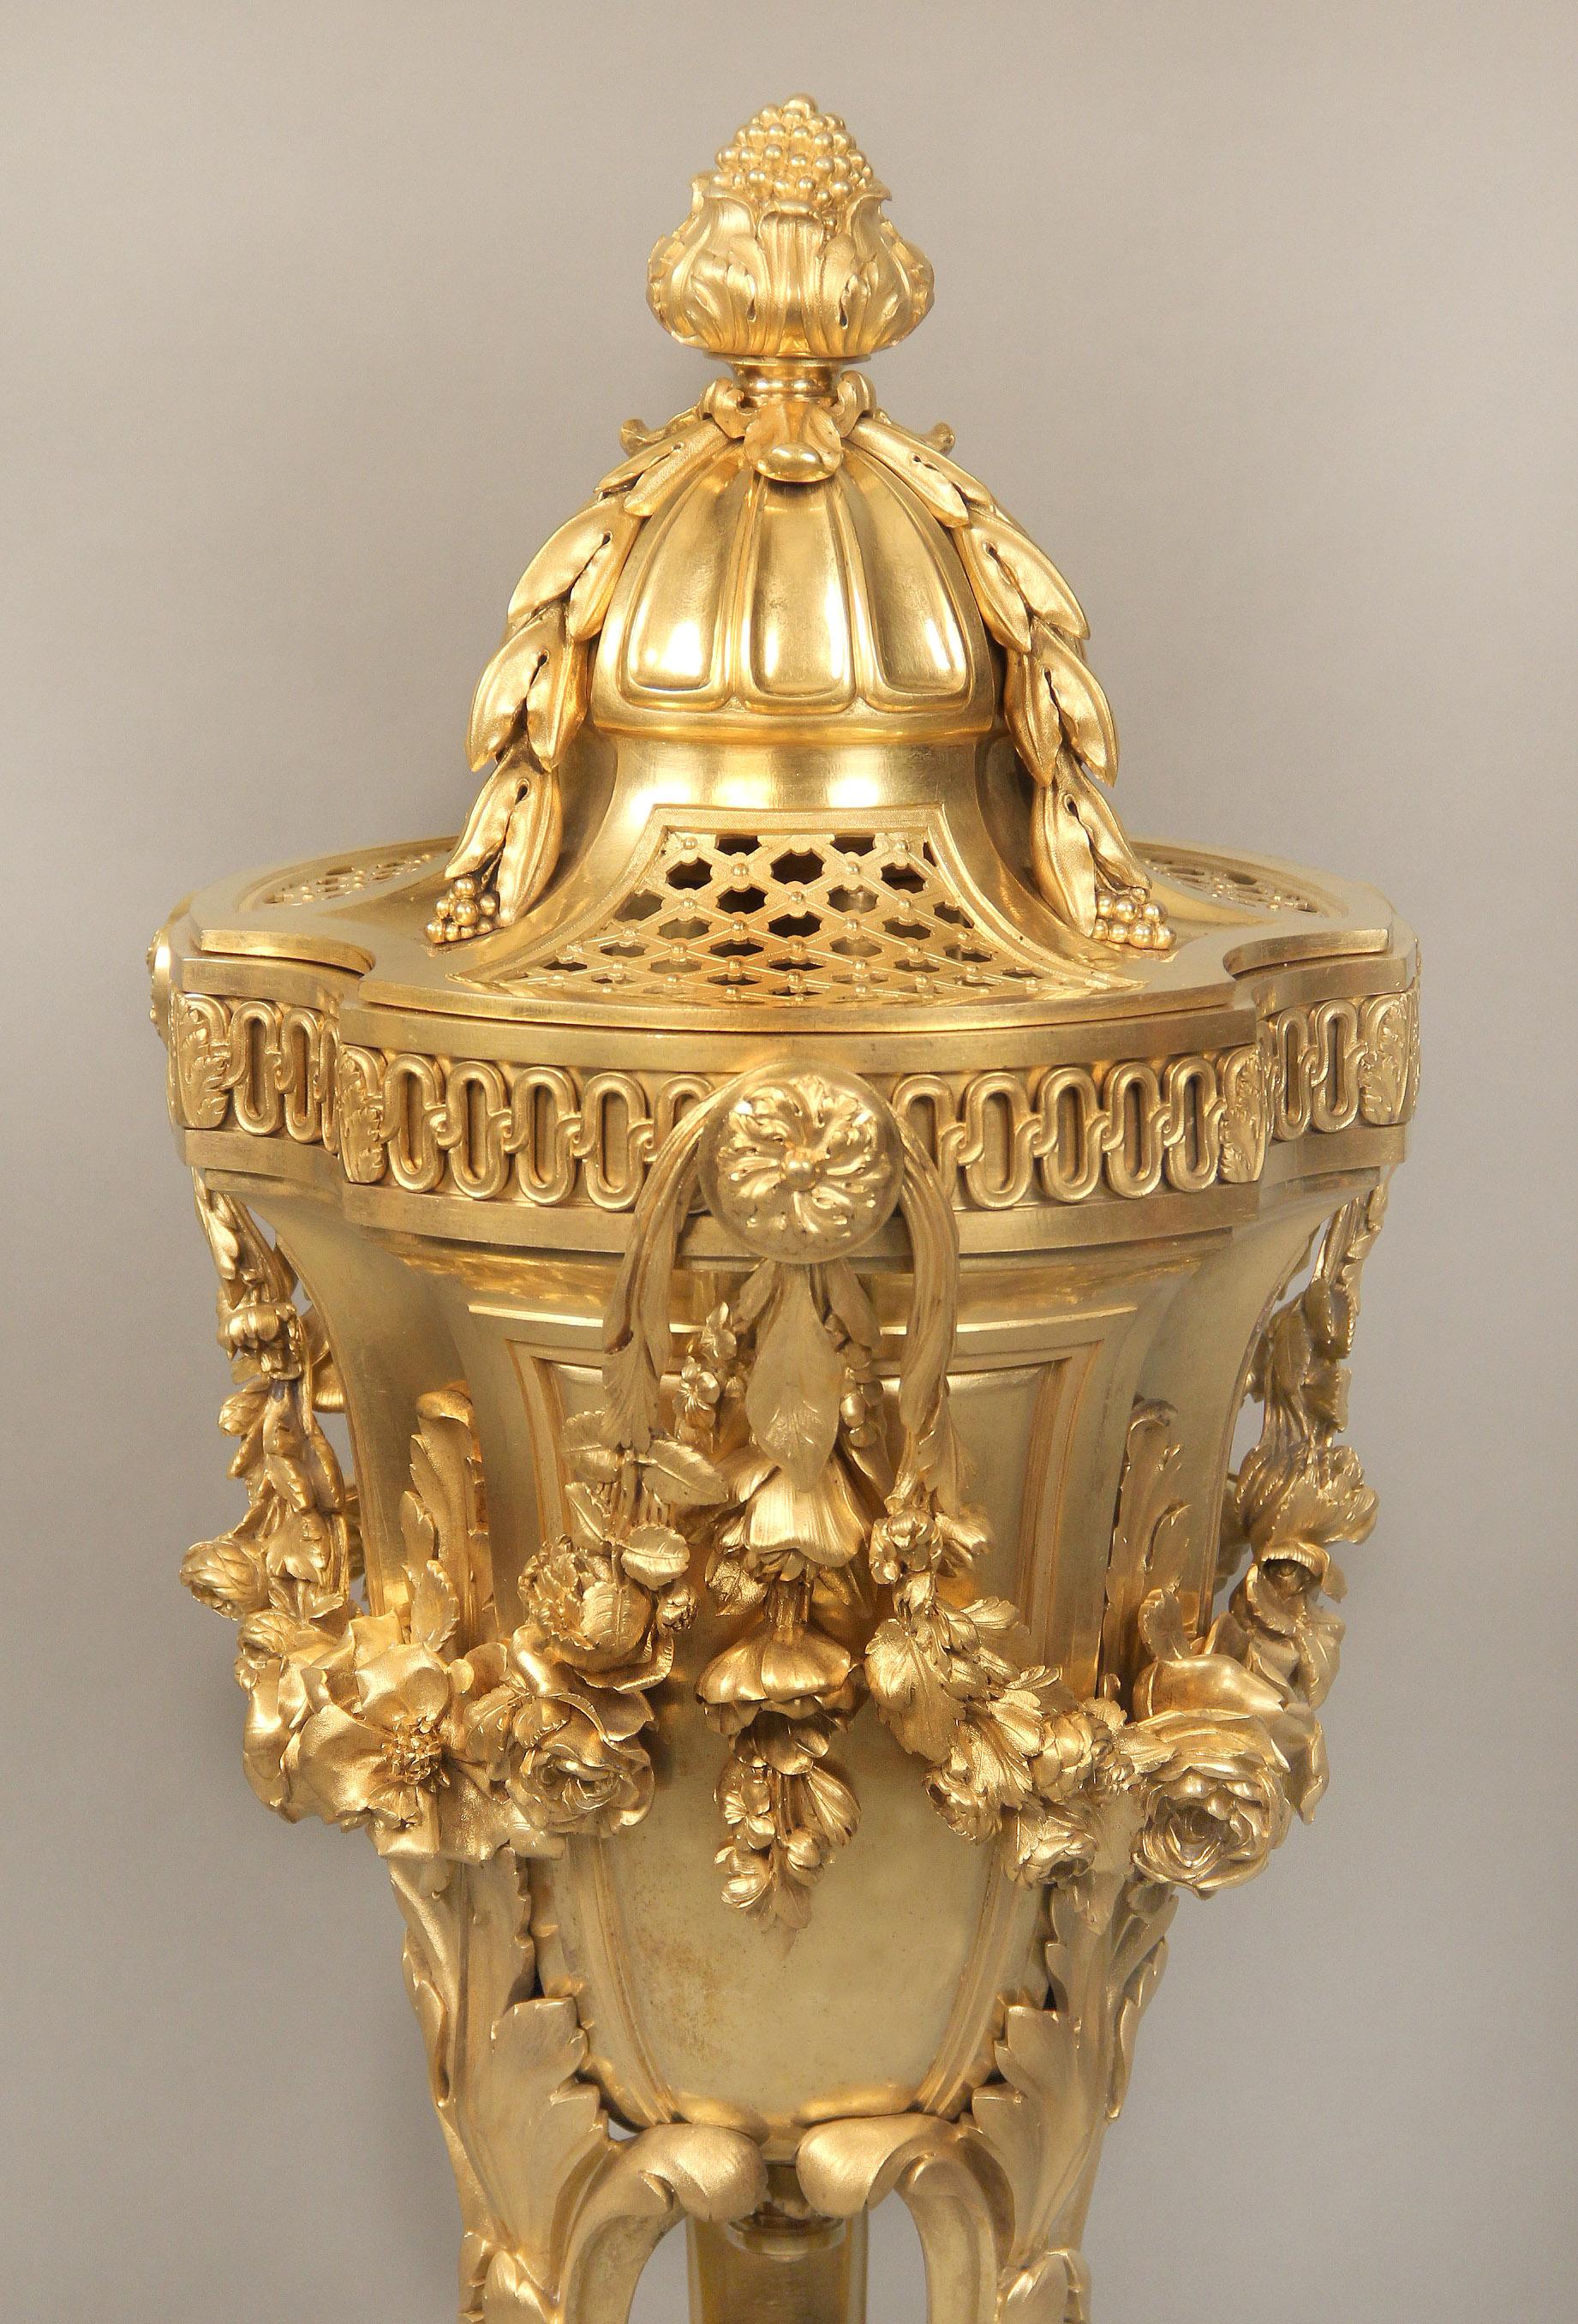  A Late 19th Century Louis XV Style Gilt Bronze Brule Parfum

Made entirely of gilded bronze with carvings of berries, flowers and foliage. With a separate top and standing upon lion paw feet.